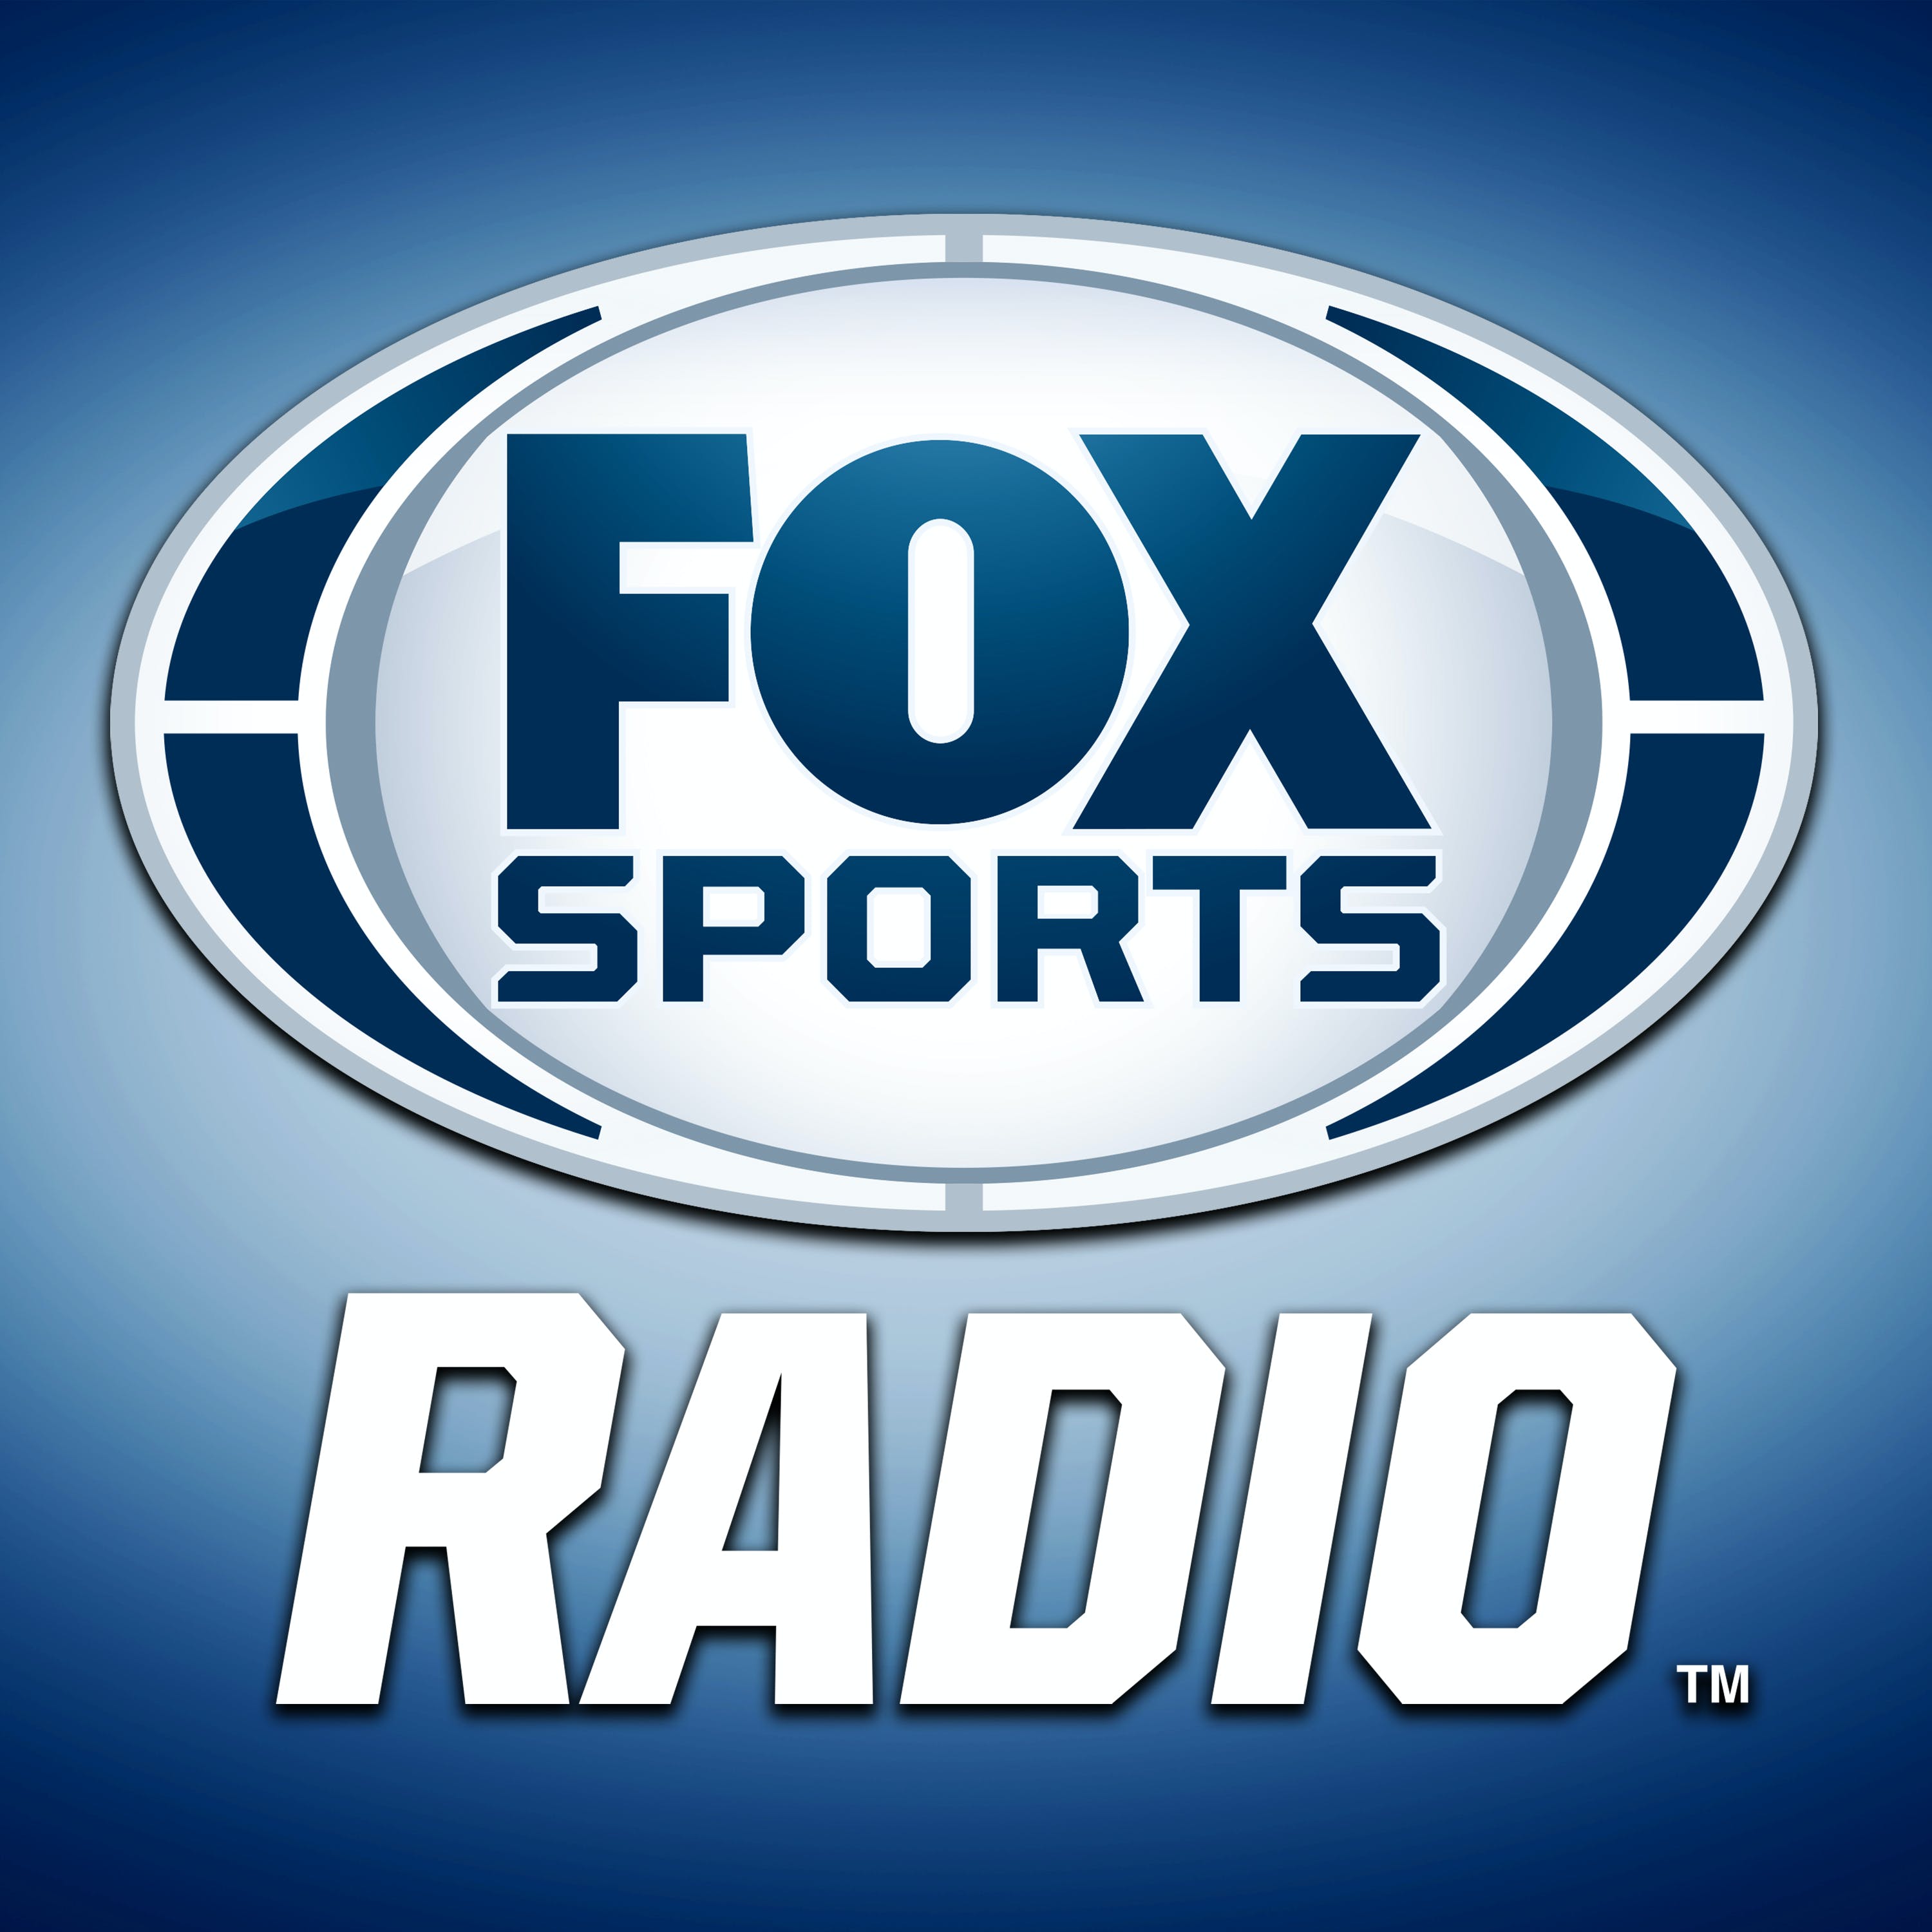 01/03/2021 - FOX Sports Red Zone Radio with Steve Hartman and Rich Ohrnberger - Week 17 Highlights and Analysis, PLUS Daryl Johnston